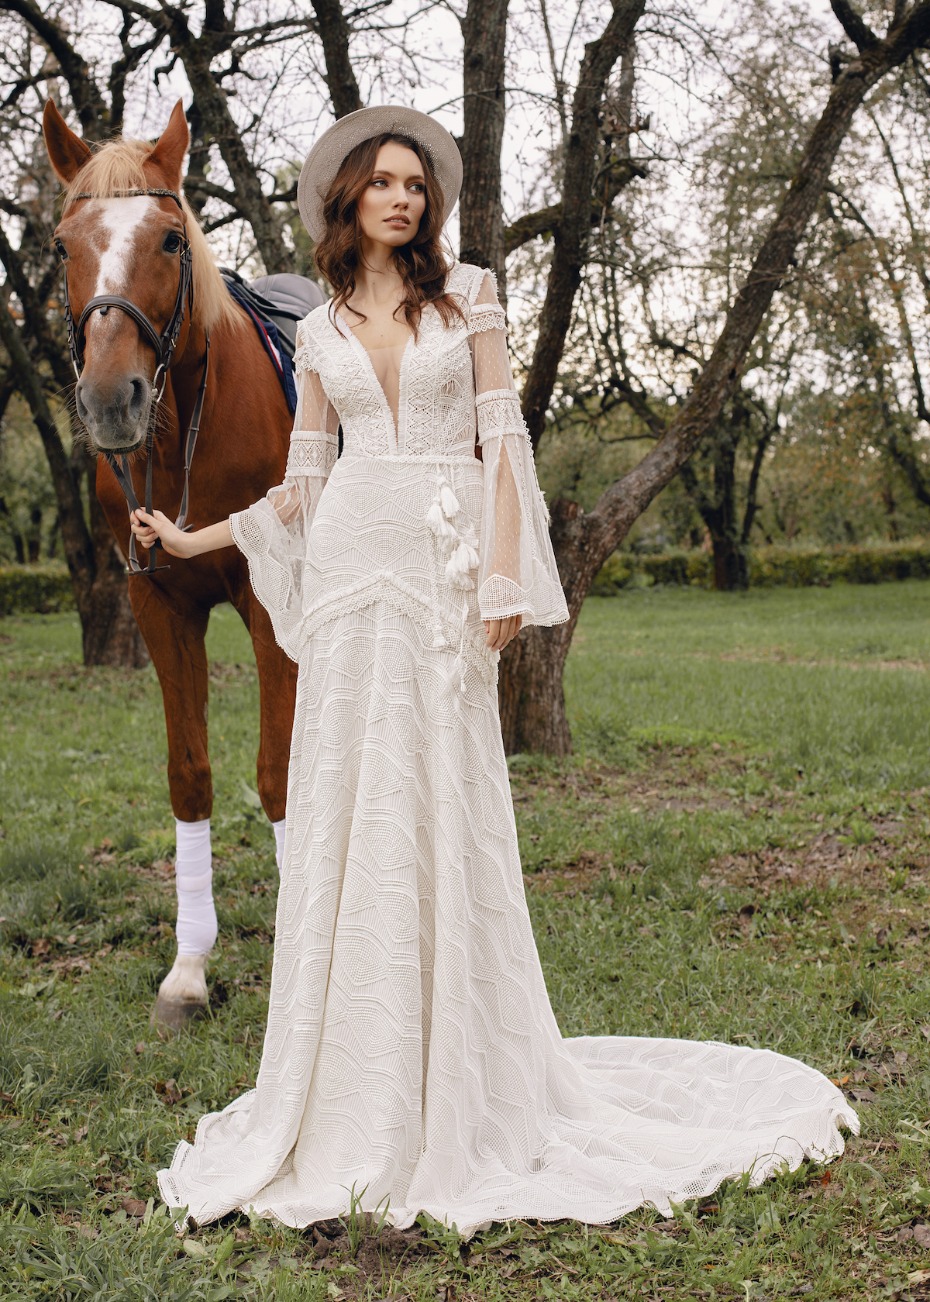 These Wedding Dresses Are Legit Love In Fashion Form